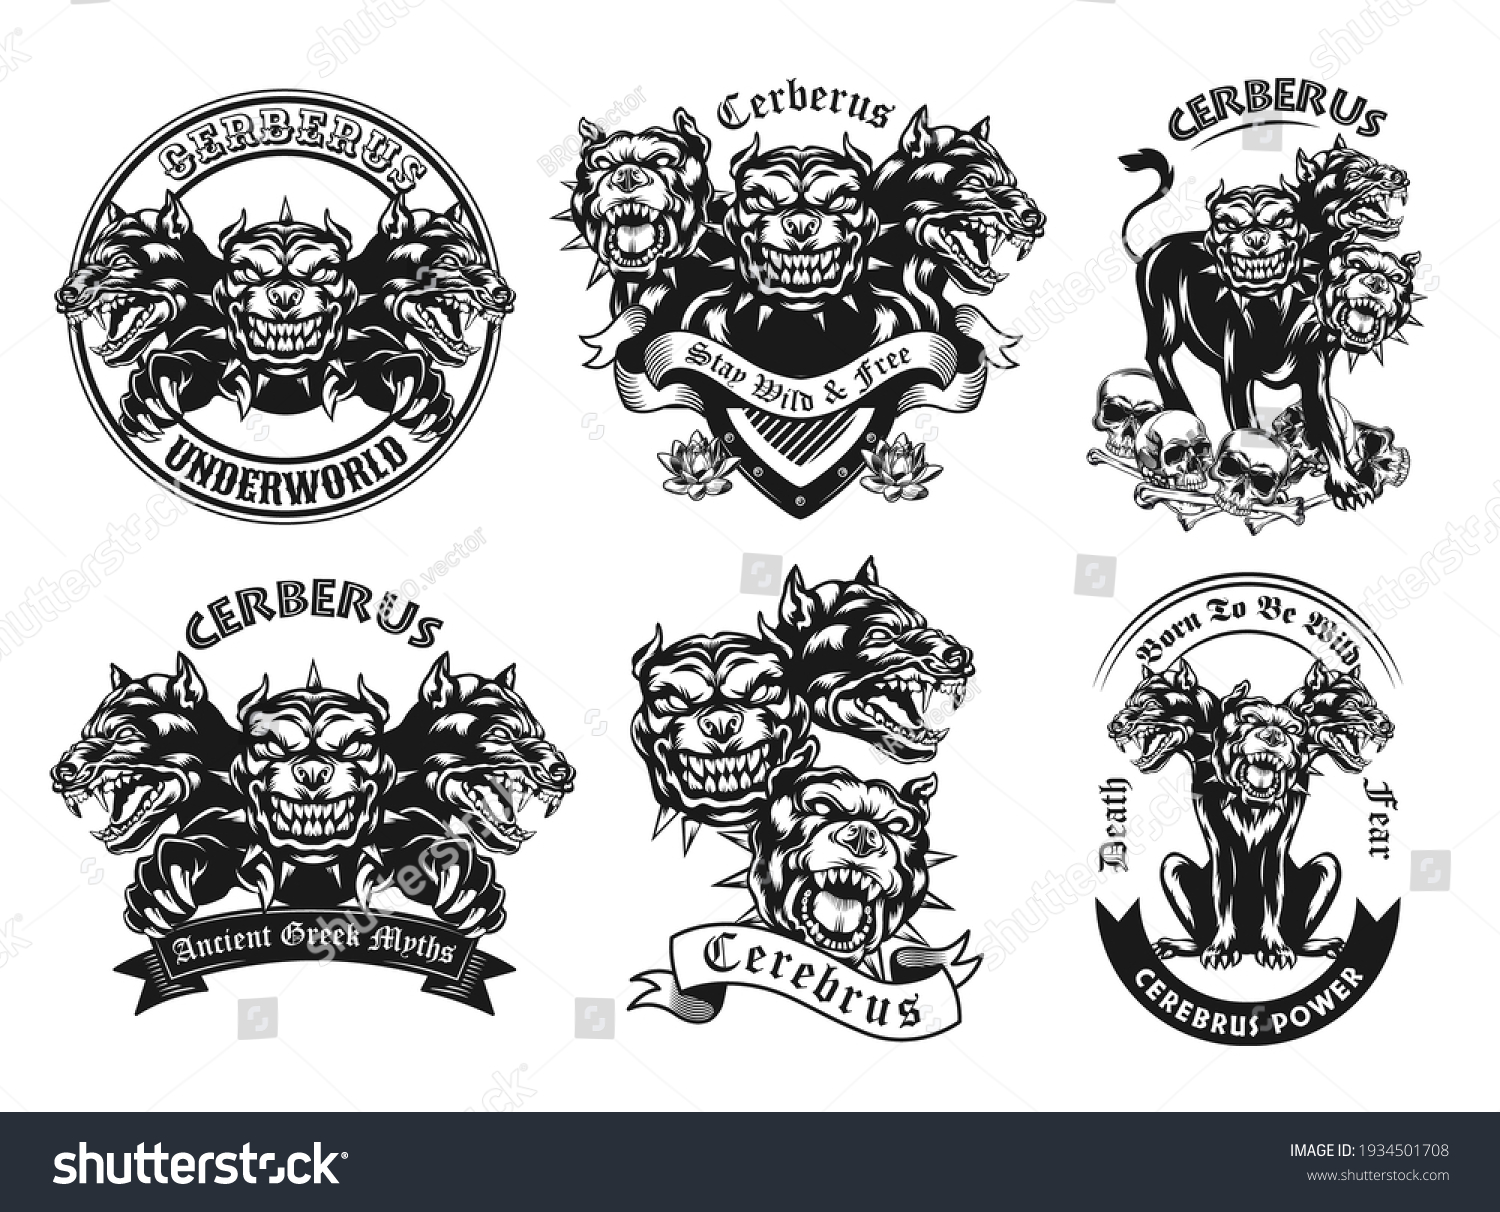 SVG of Monochrome emblems with Cerberus vector illustration set. Vintage logotypes with three headed ancient myth dog. Mythology and fantastic creatures concept can be used for stickers and badges svg